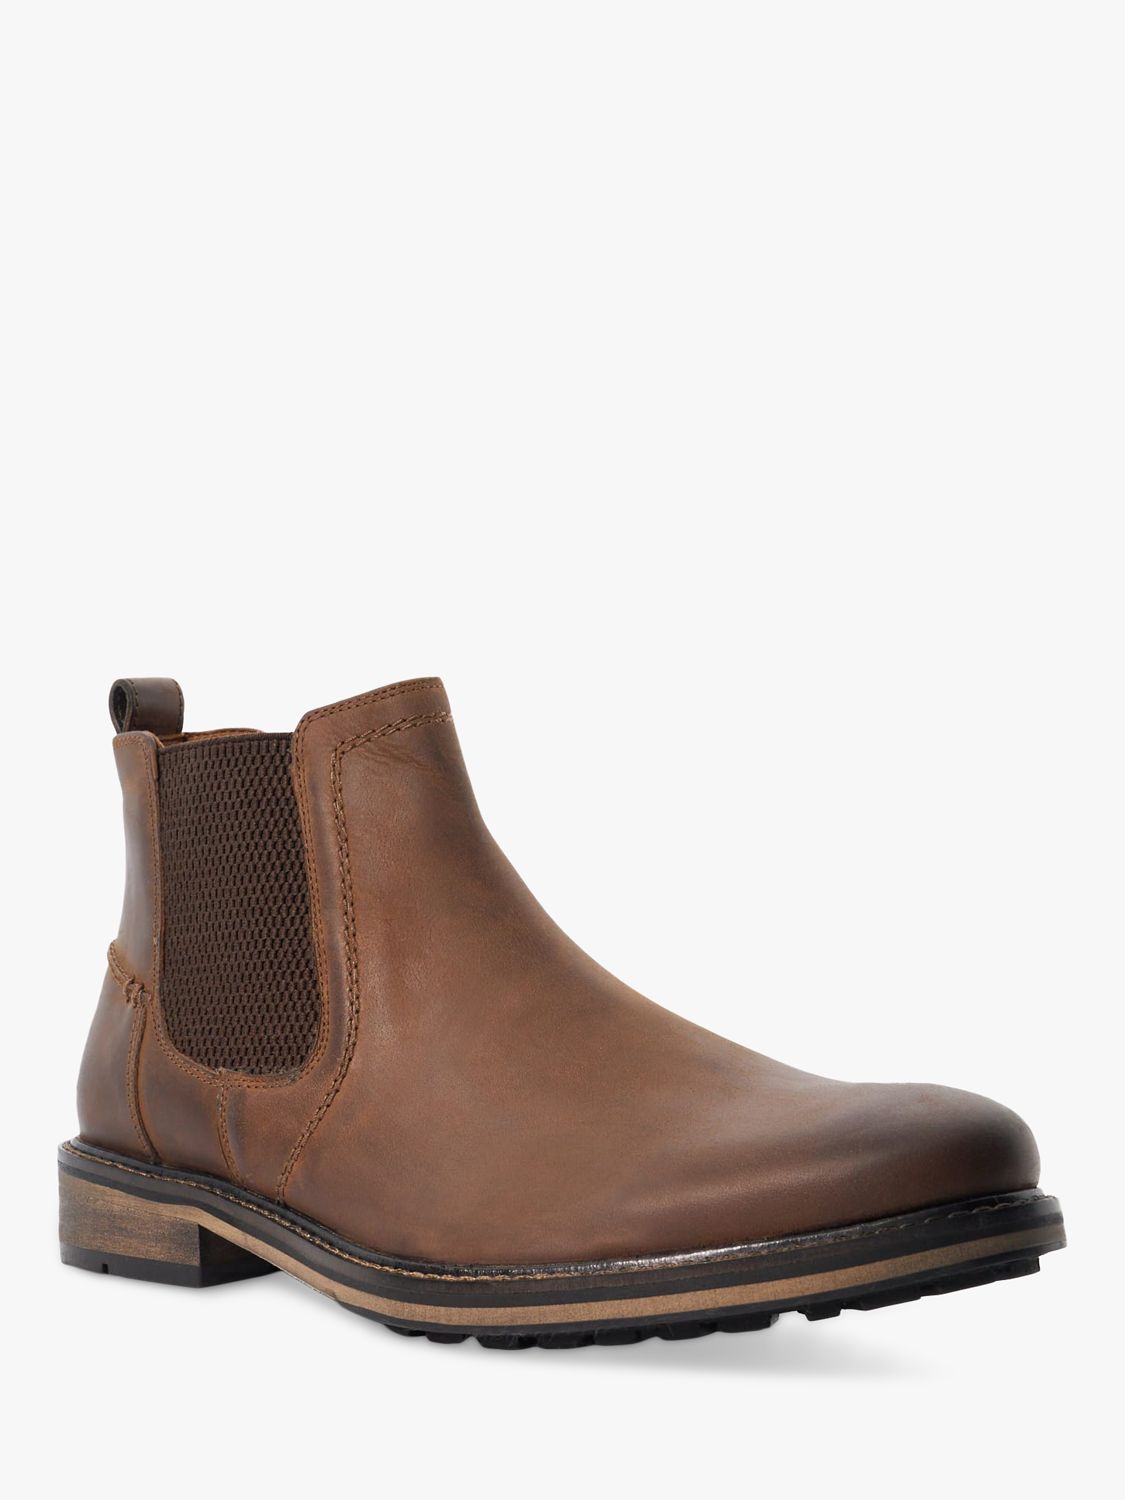 Buy Dune Chorleys Leather Boots, Brown Online at johnlewis.com